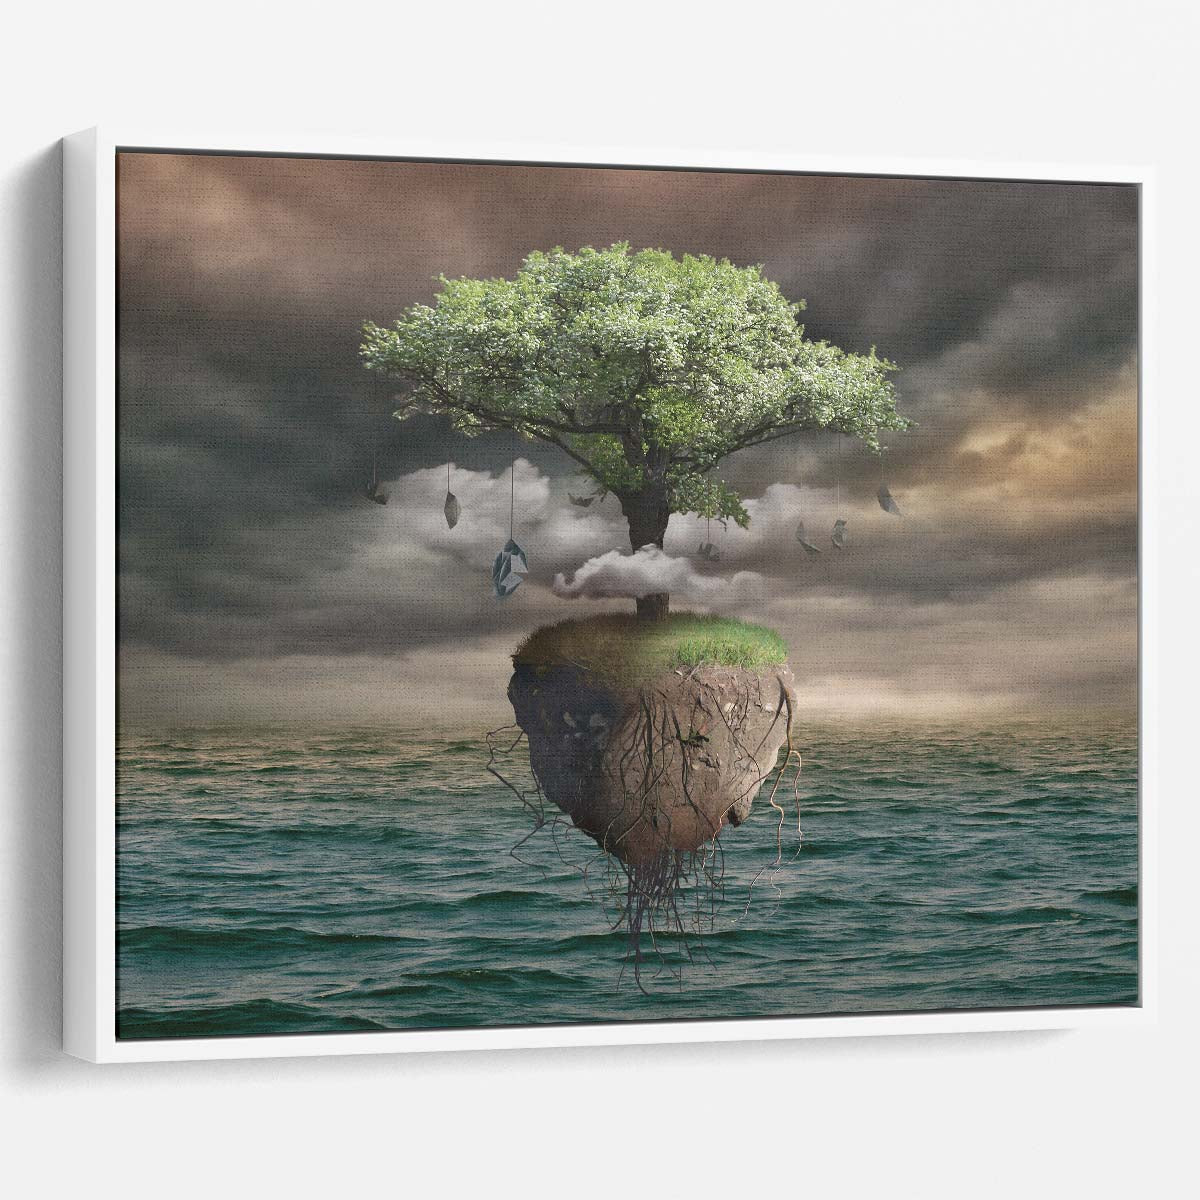 Surreal Autumn Island Dreamscape Tree Wall Art by Luxuriance Designs. Made in USA.